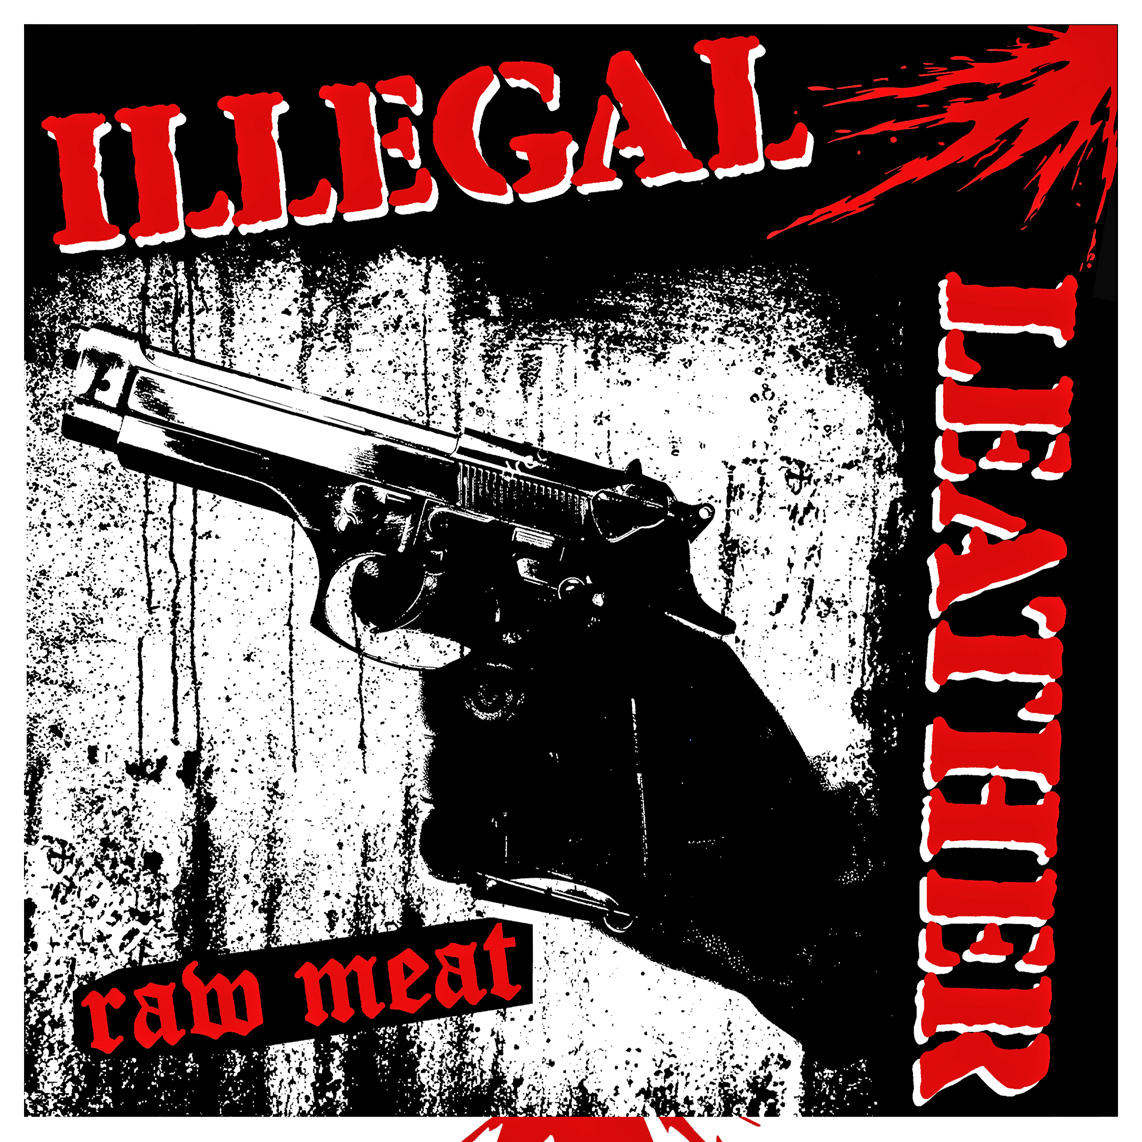 Illegal Leather- Raw Meat LP ~RARE COVER #2 OF 4-COVER QUADRILOGY LTD TO 35 HAND NUMBERED COPIES!